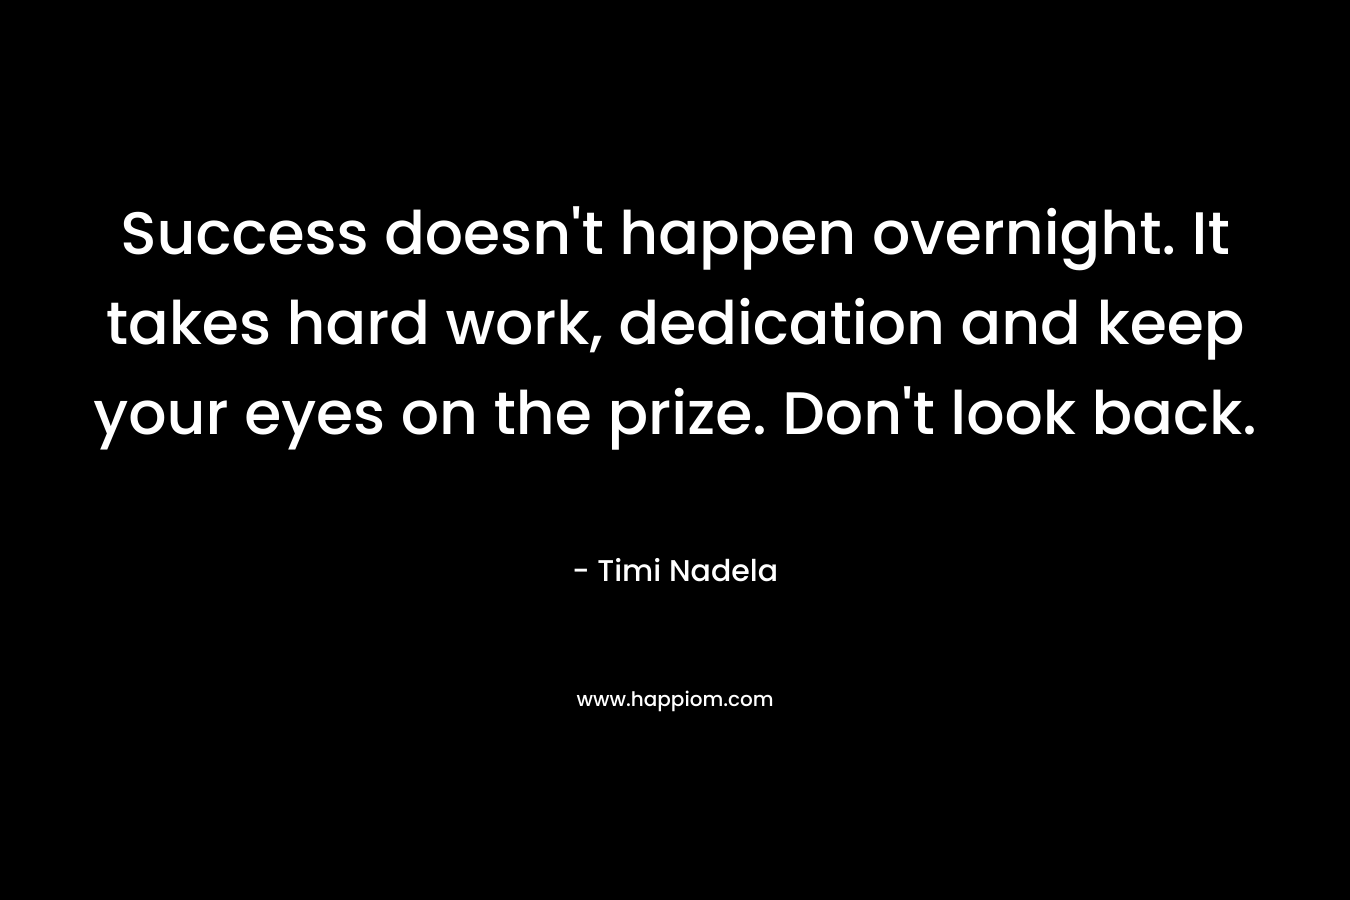 Success doesn't happen overnight. It takes hard work, dedication and keep your eyes on the prize. Don't look back.